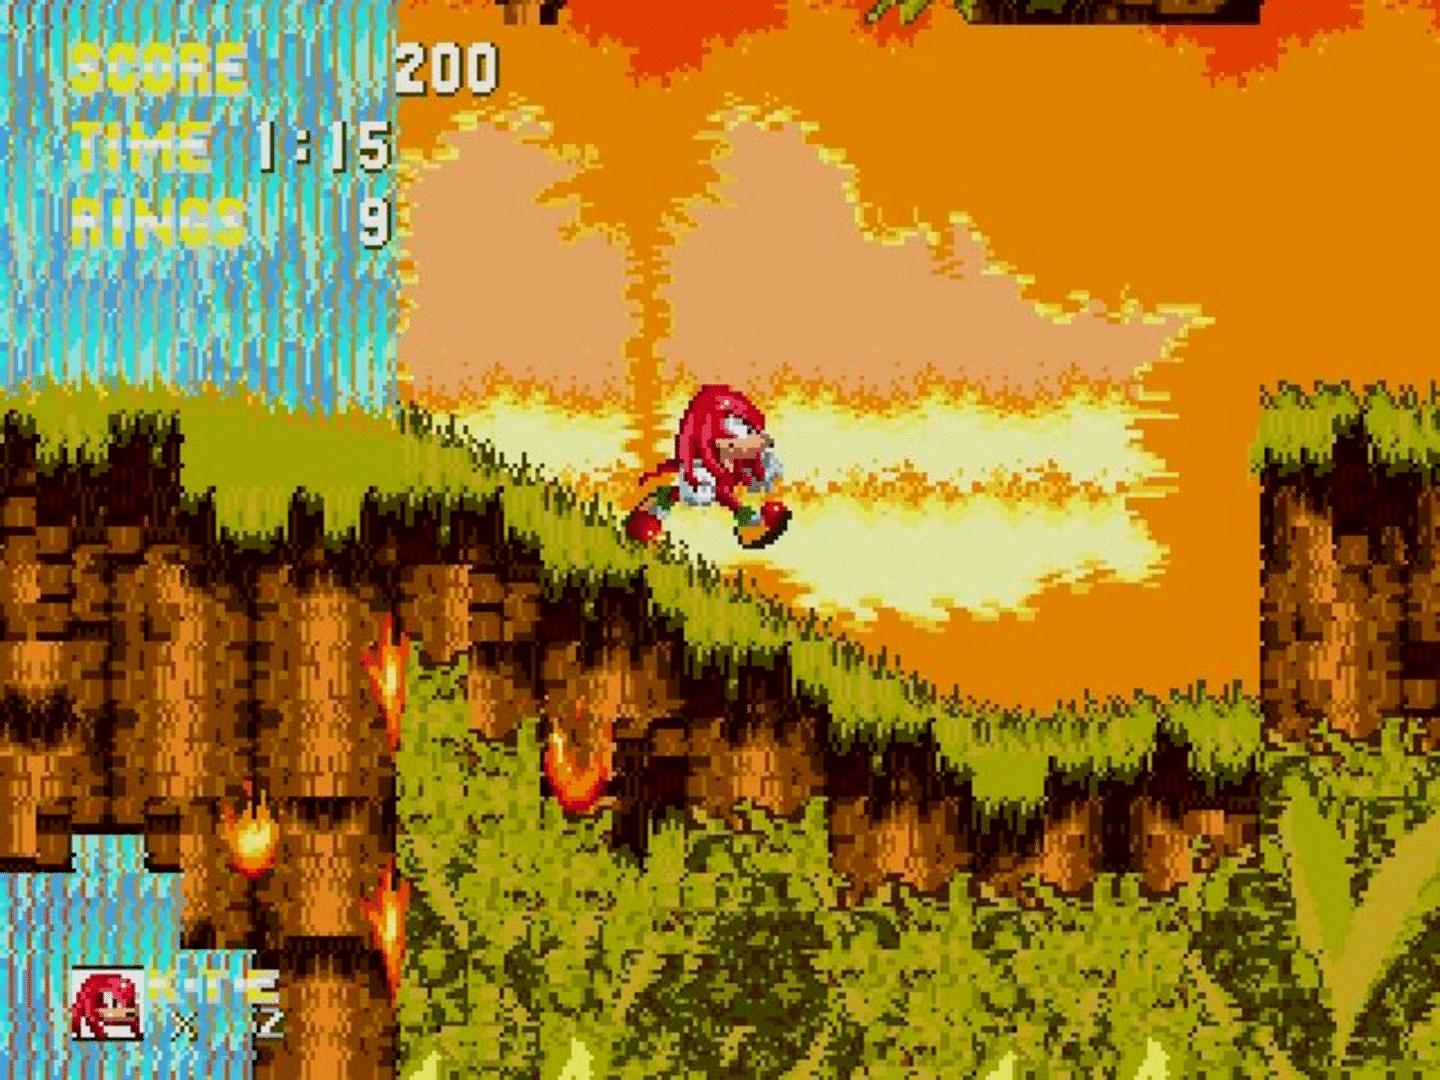 Knuckles was introduced in Sonic 3 as one of Sonic and Tails' adversaries.  (Source: Backloggd/Reproduction)